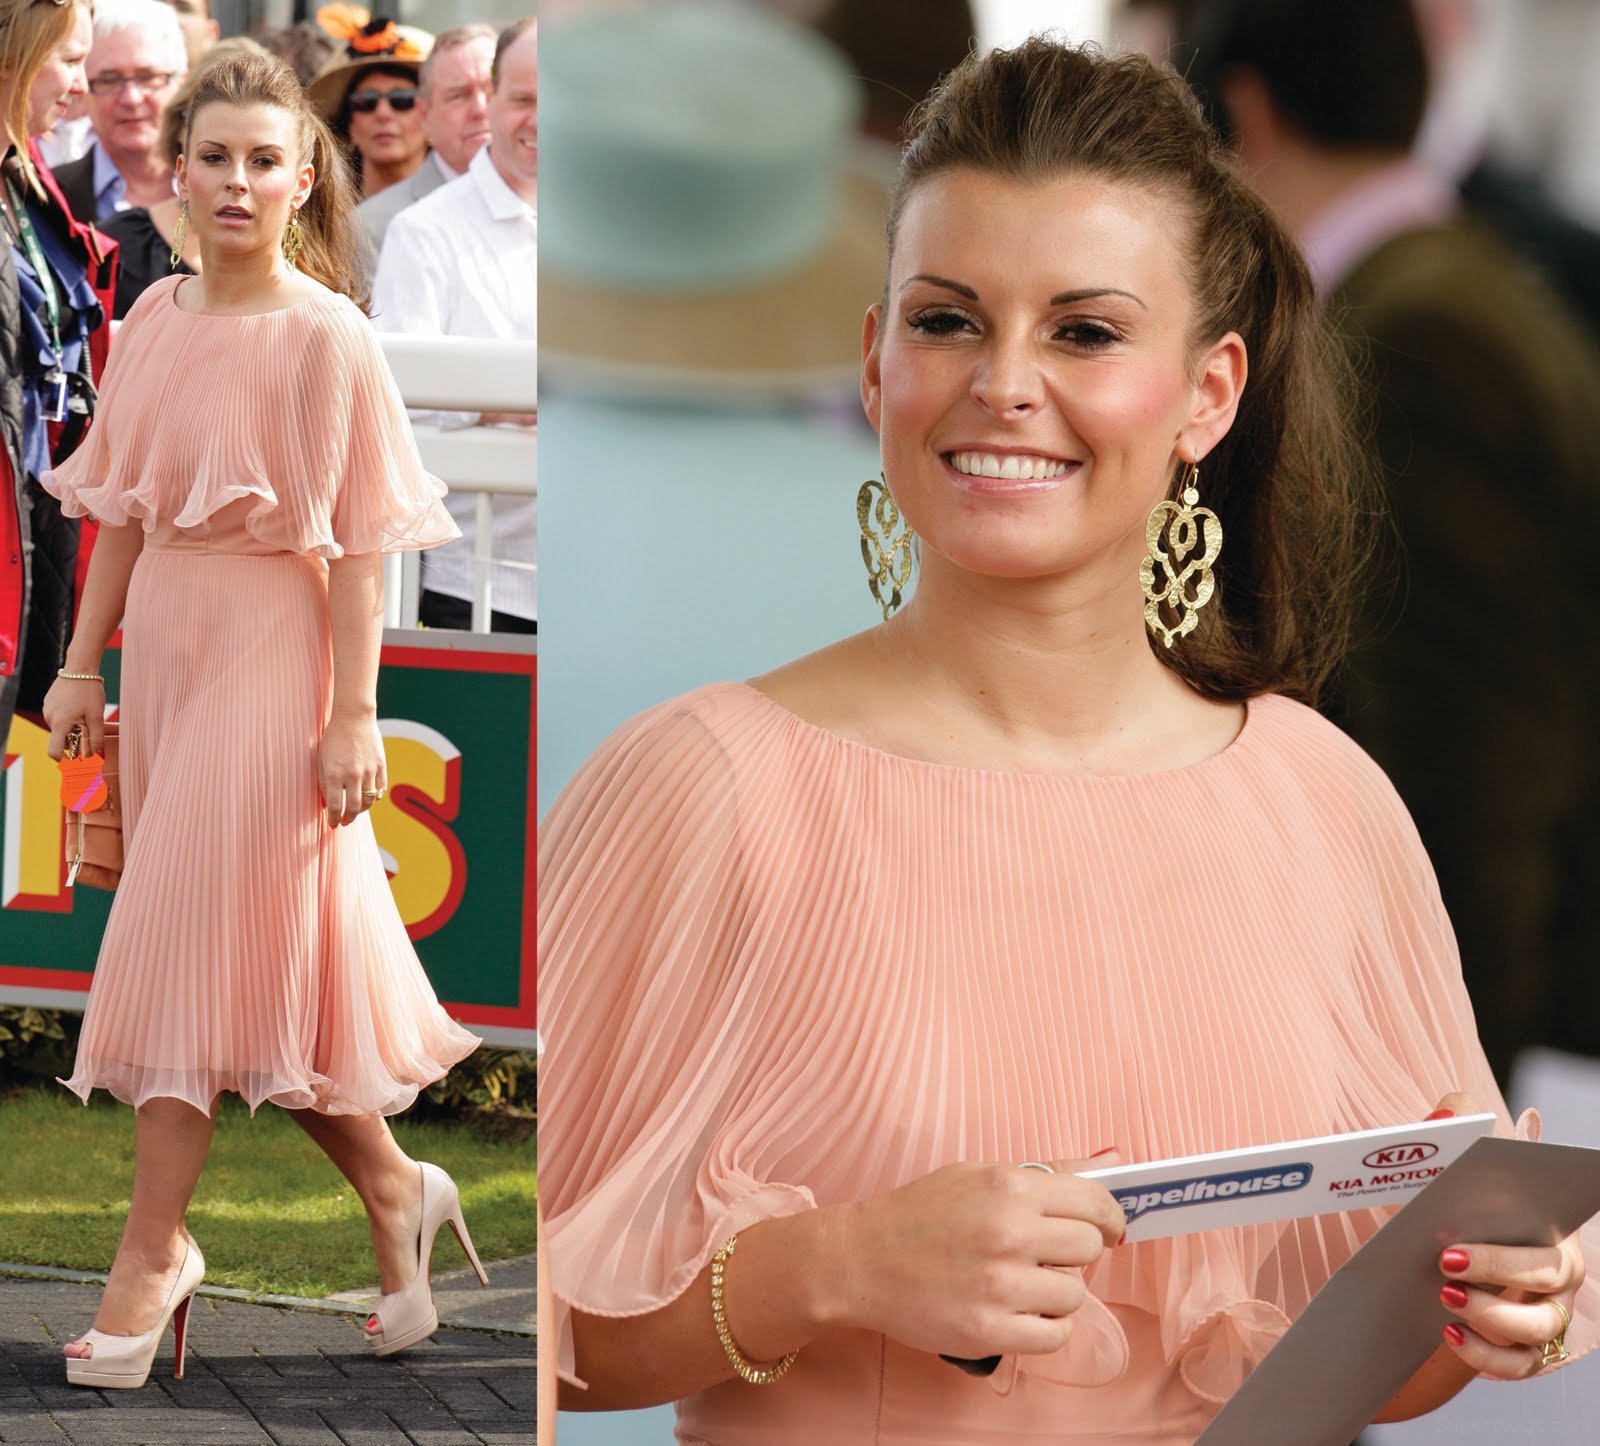 Glamorous Coleen Rooney Super Wags Hottest Wives And Girlfriends Of High Profile Sportsmen